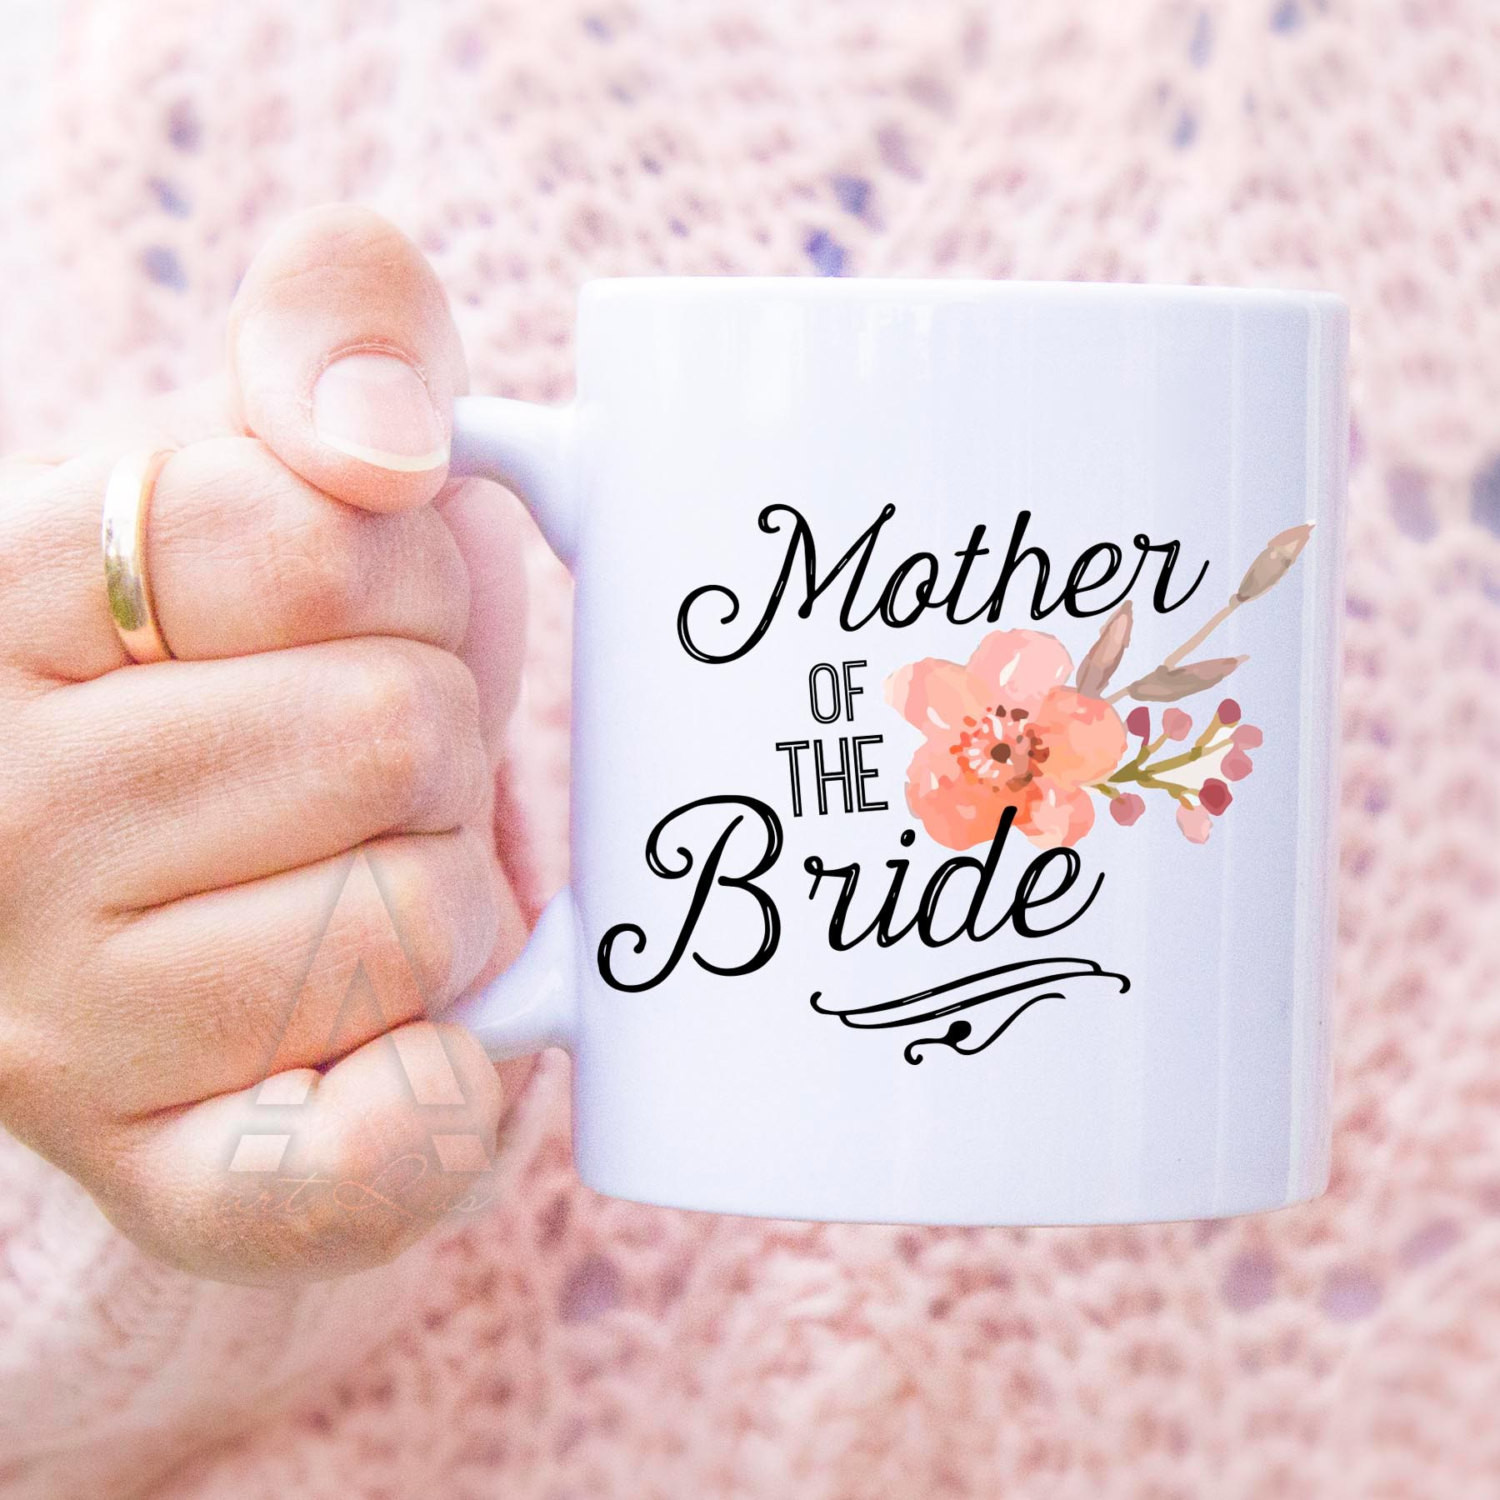 Mother Of The Bride Gift Ideas
 ts for mother of the bride mother of the bride t ideas